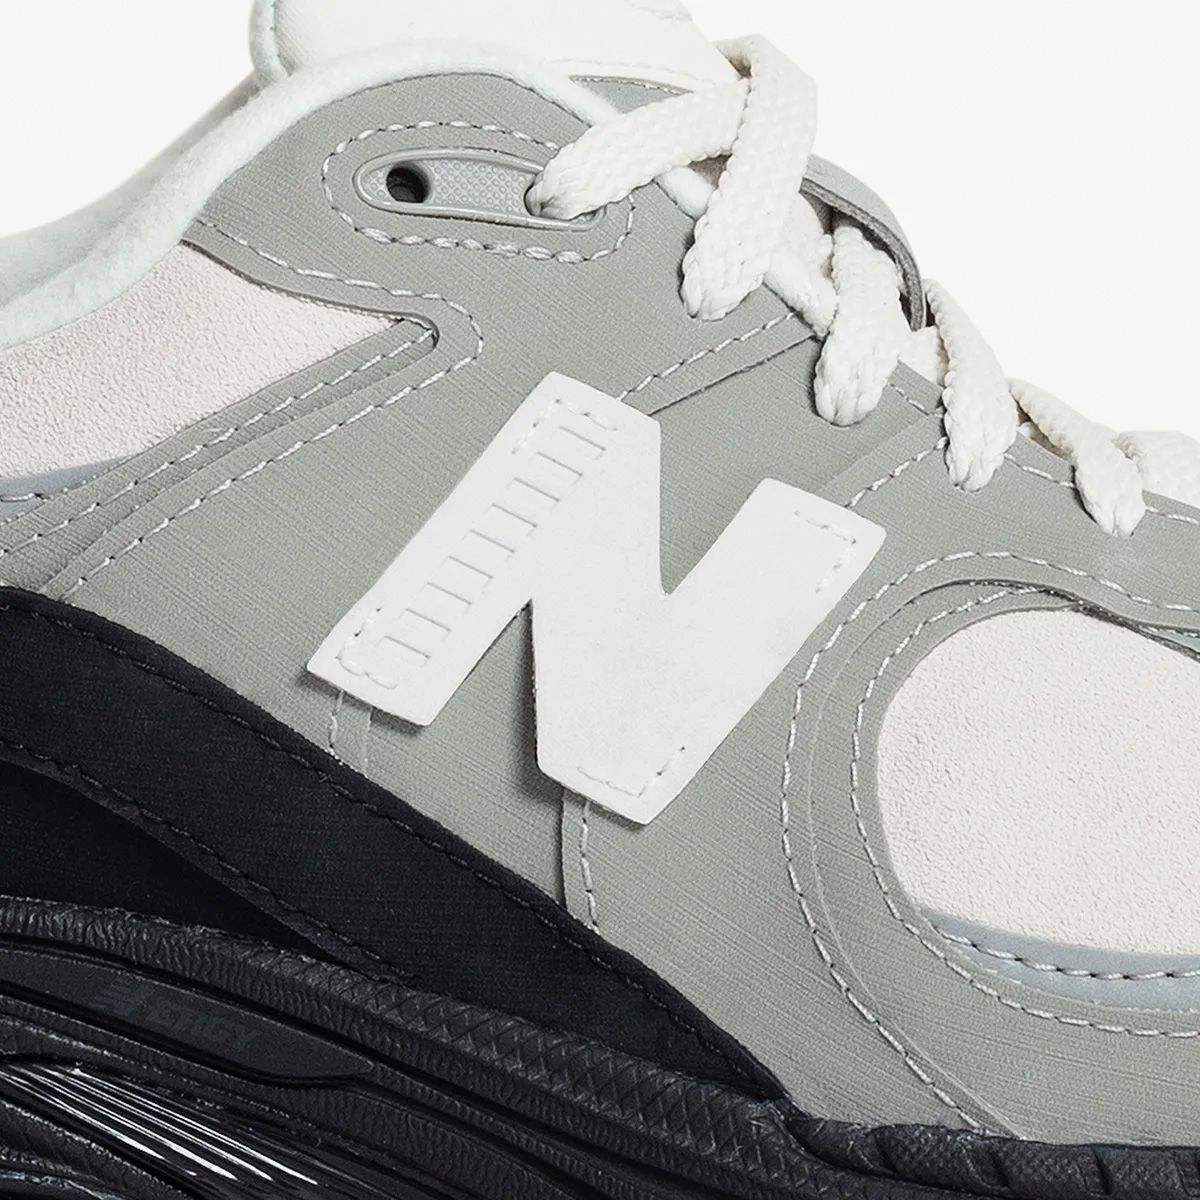 The Basement x New Balance 2002R “For Locals” Drops December 23 